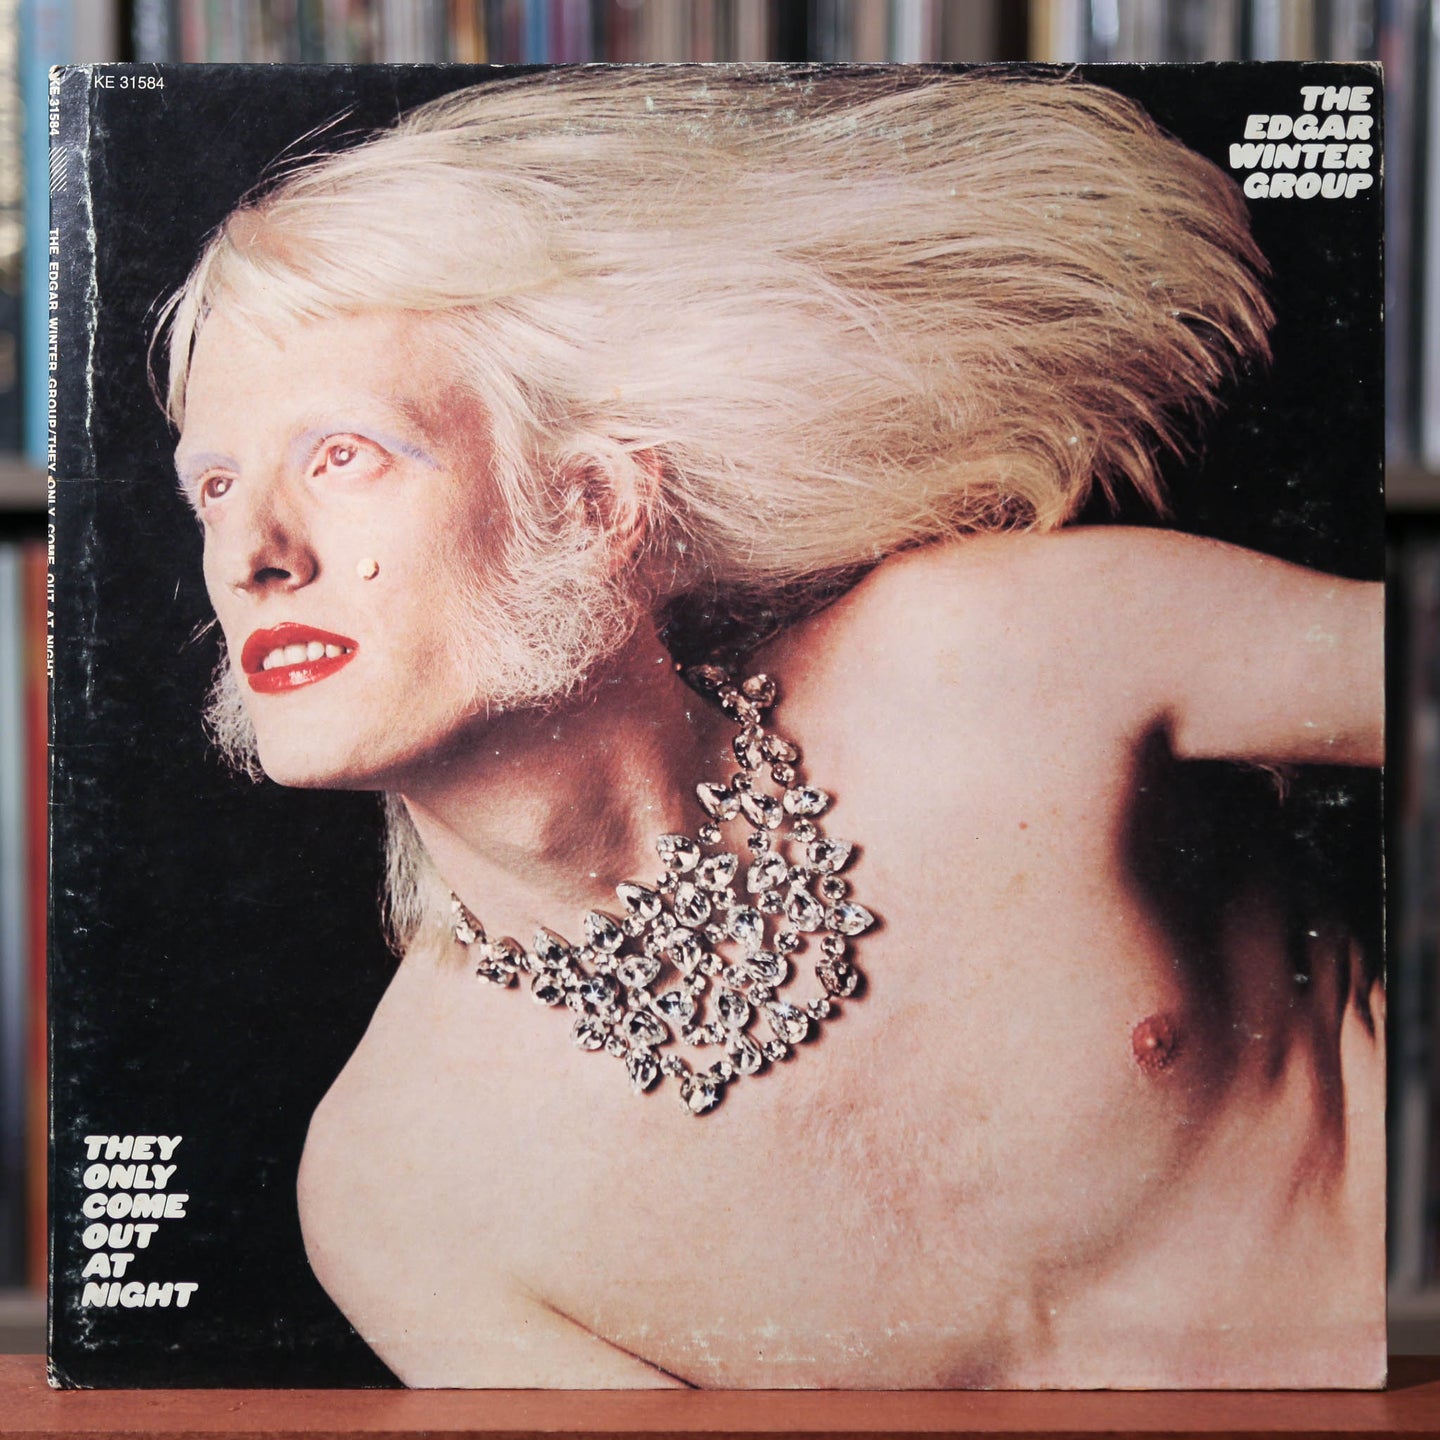 Edgar Winter Group - They Only Come Out At Night - 1972 Epic, VG/VG